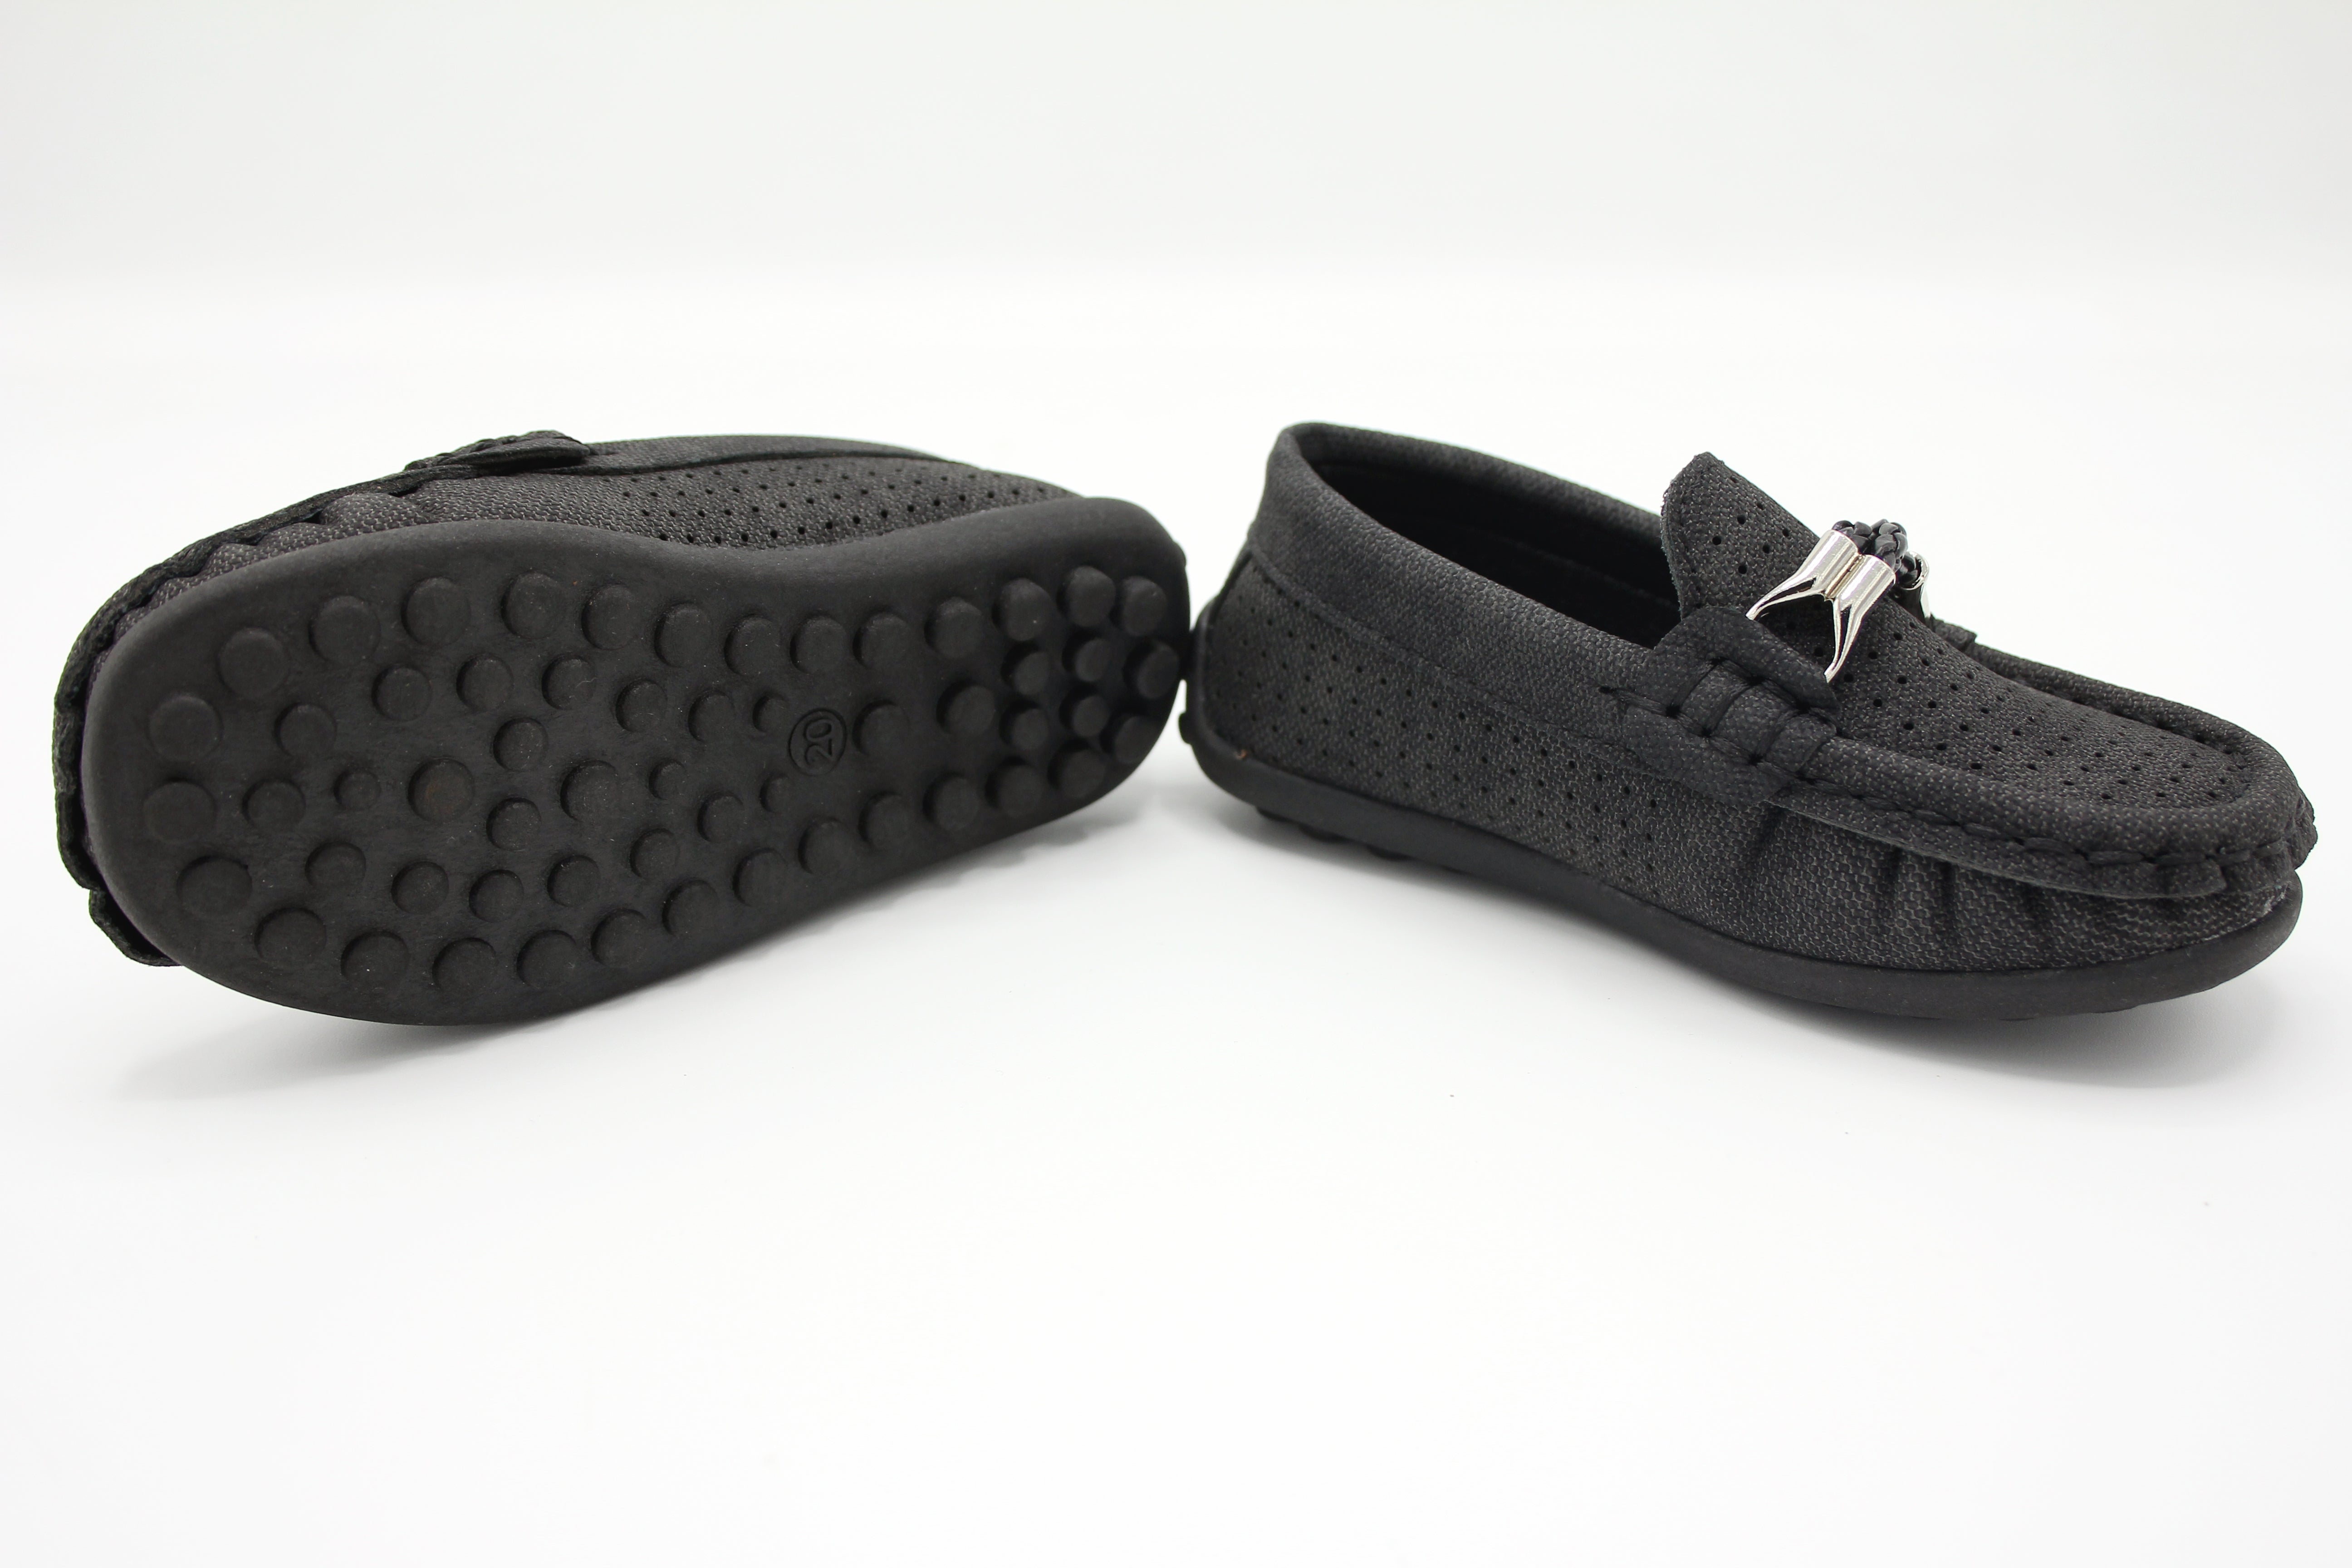 BABY BOY FORMAL SMALL SHOES 20-25 - 30028